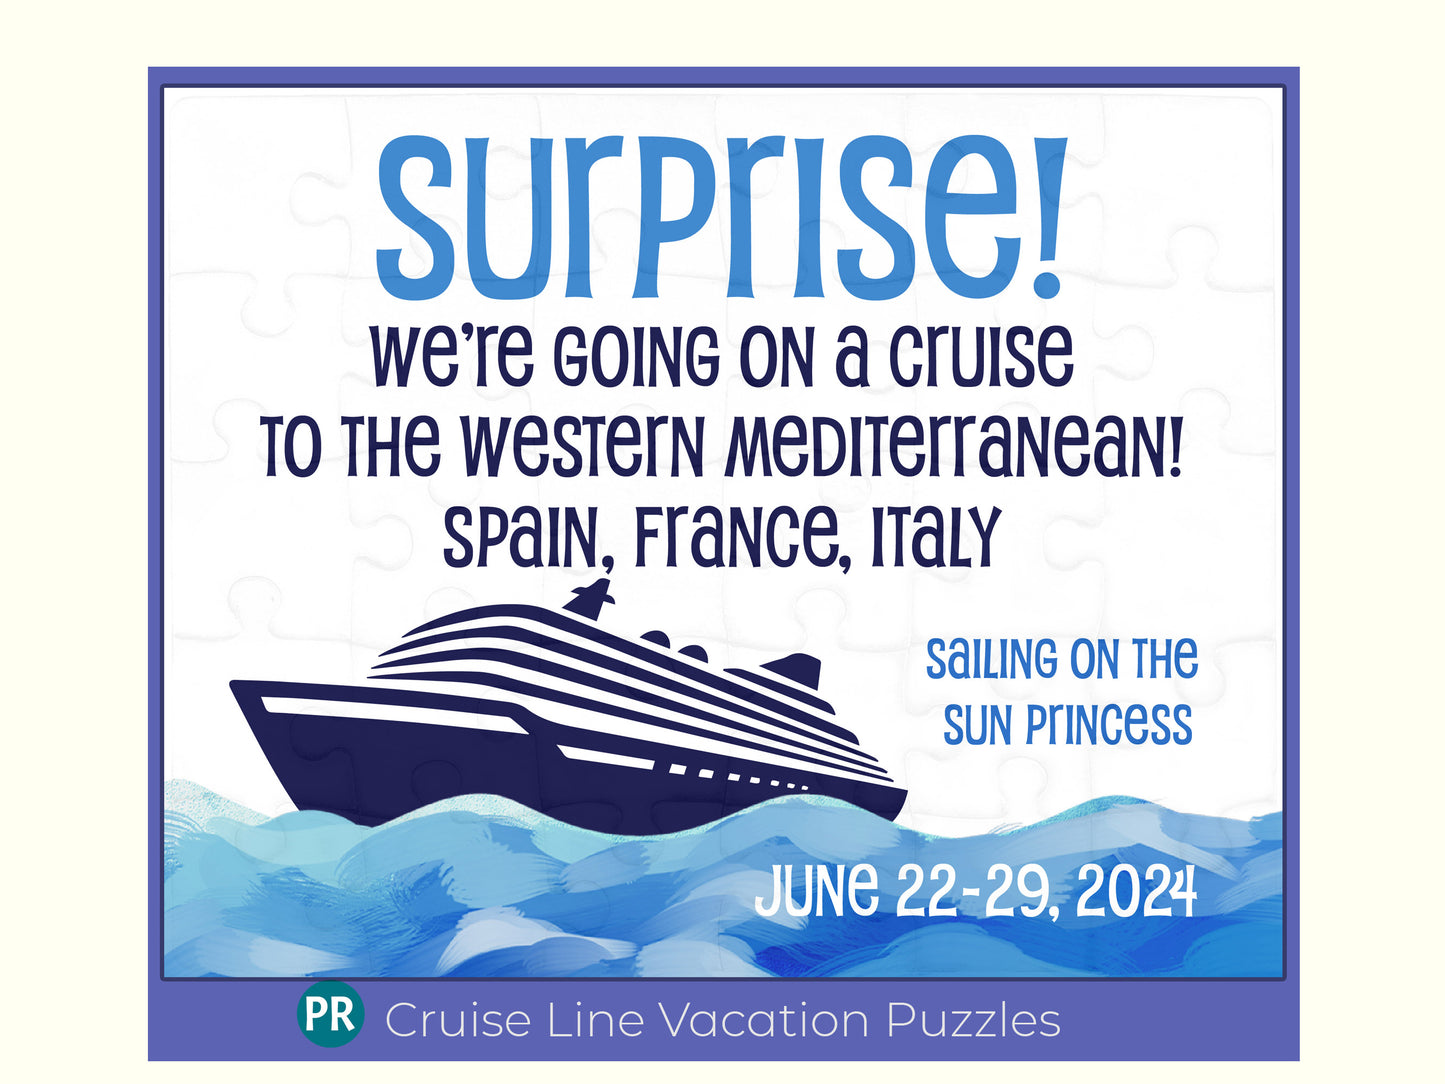 Ocean Liner Cruise ship vacation announcement. A 30 piece jigsaw puzzle with an ocean background and a cruise ship with destination and dates of travel.